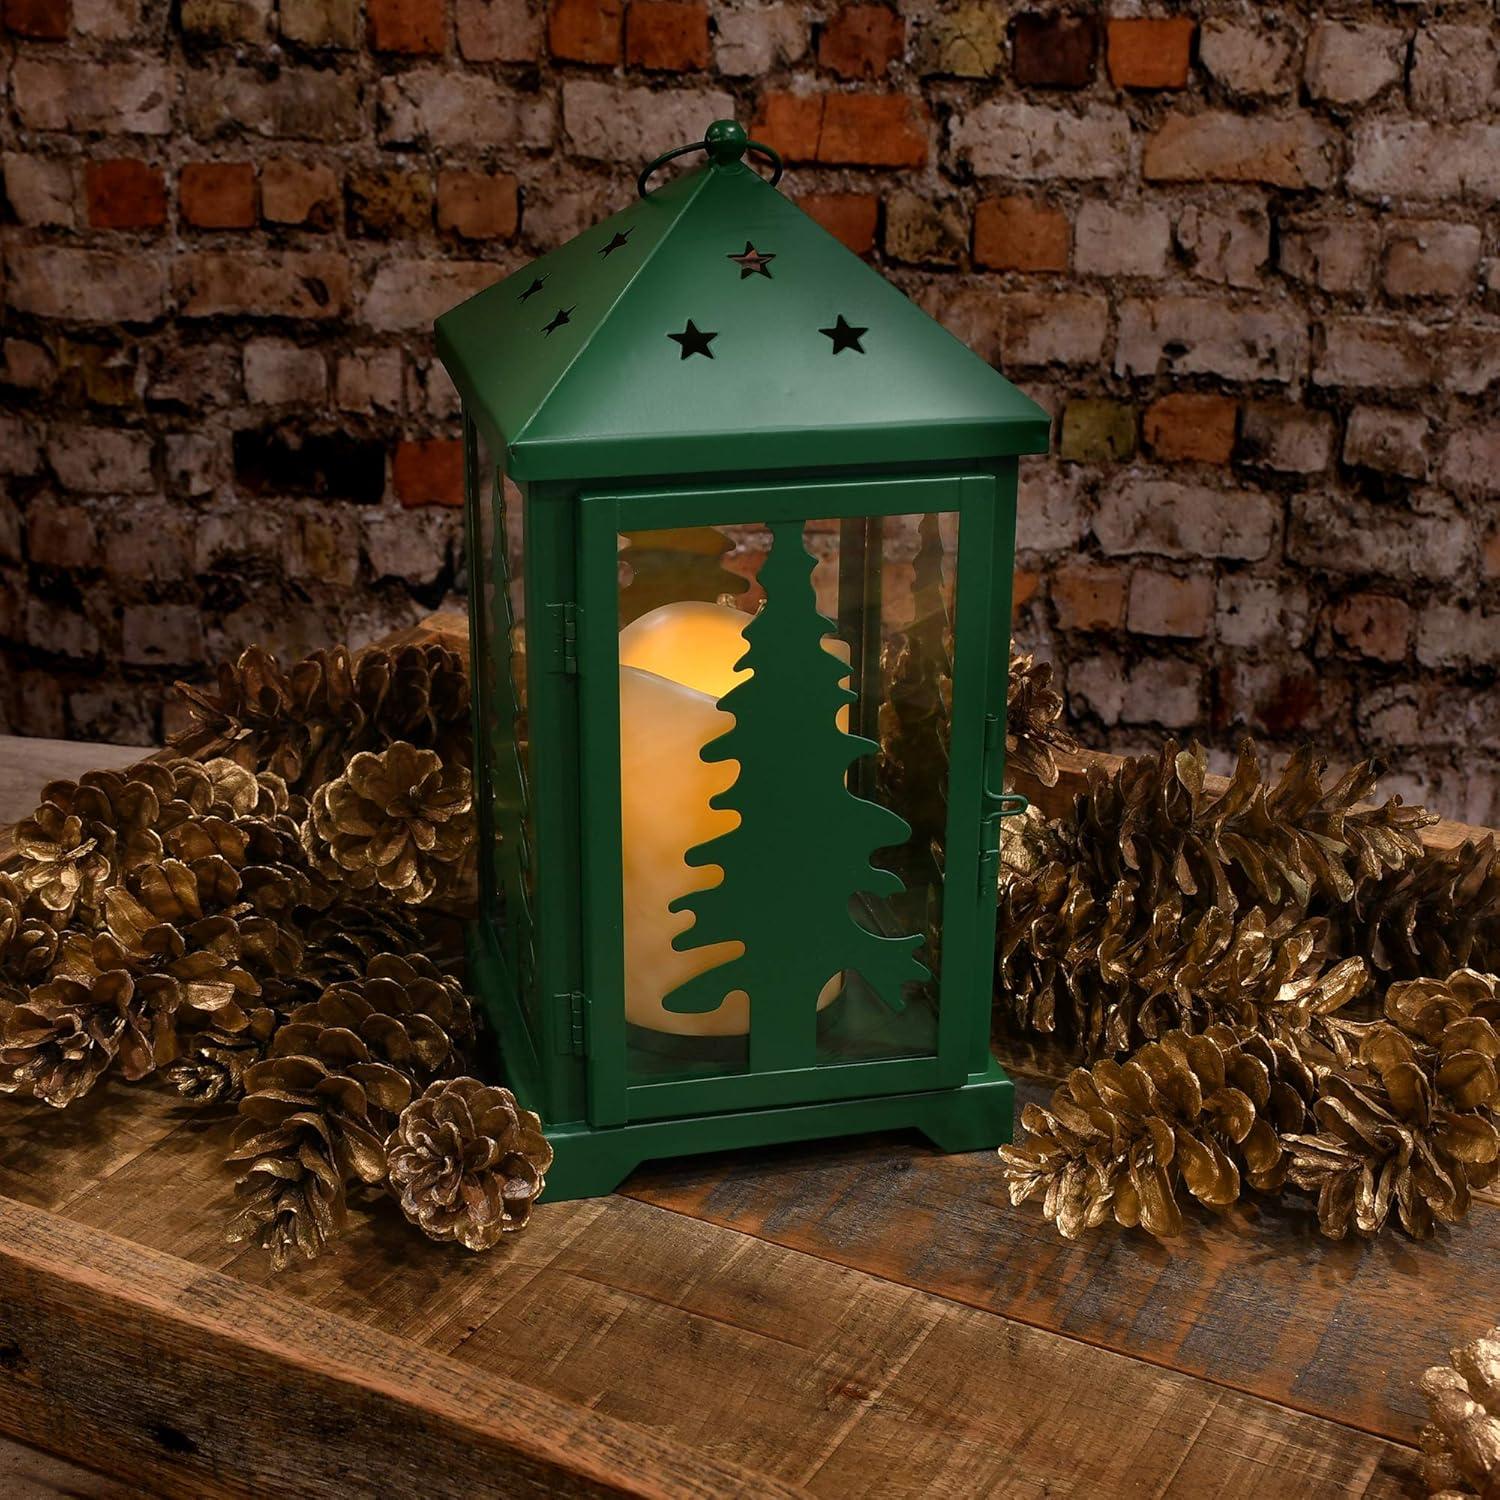 Winter Whisper Pine Tree LED Candle Lantern - Battery Operated